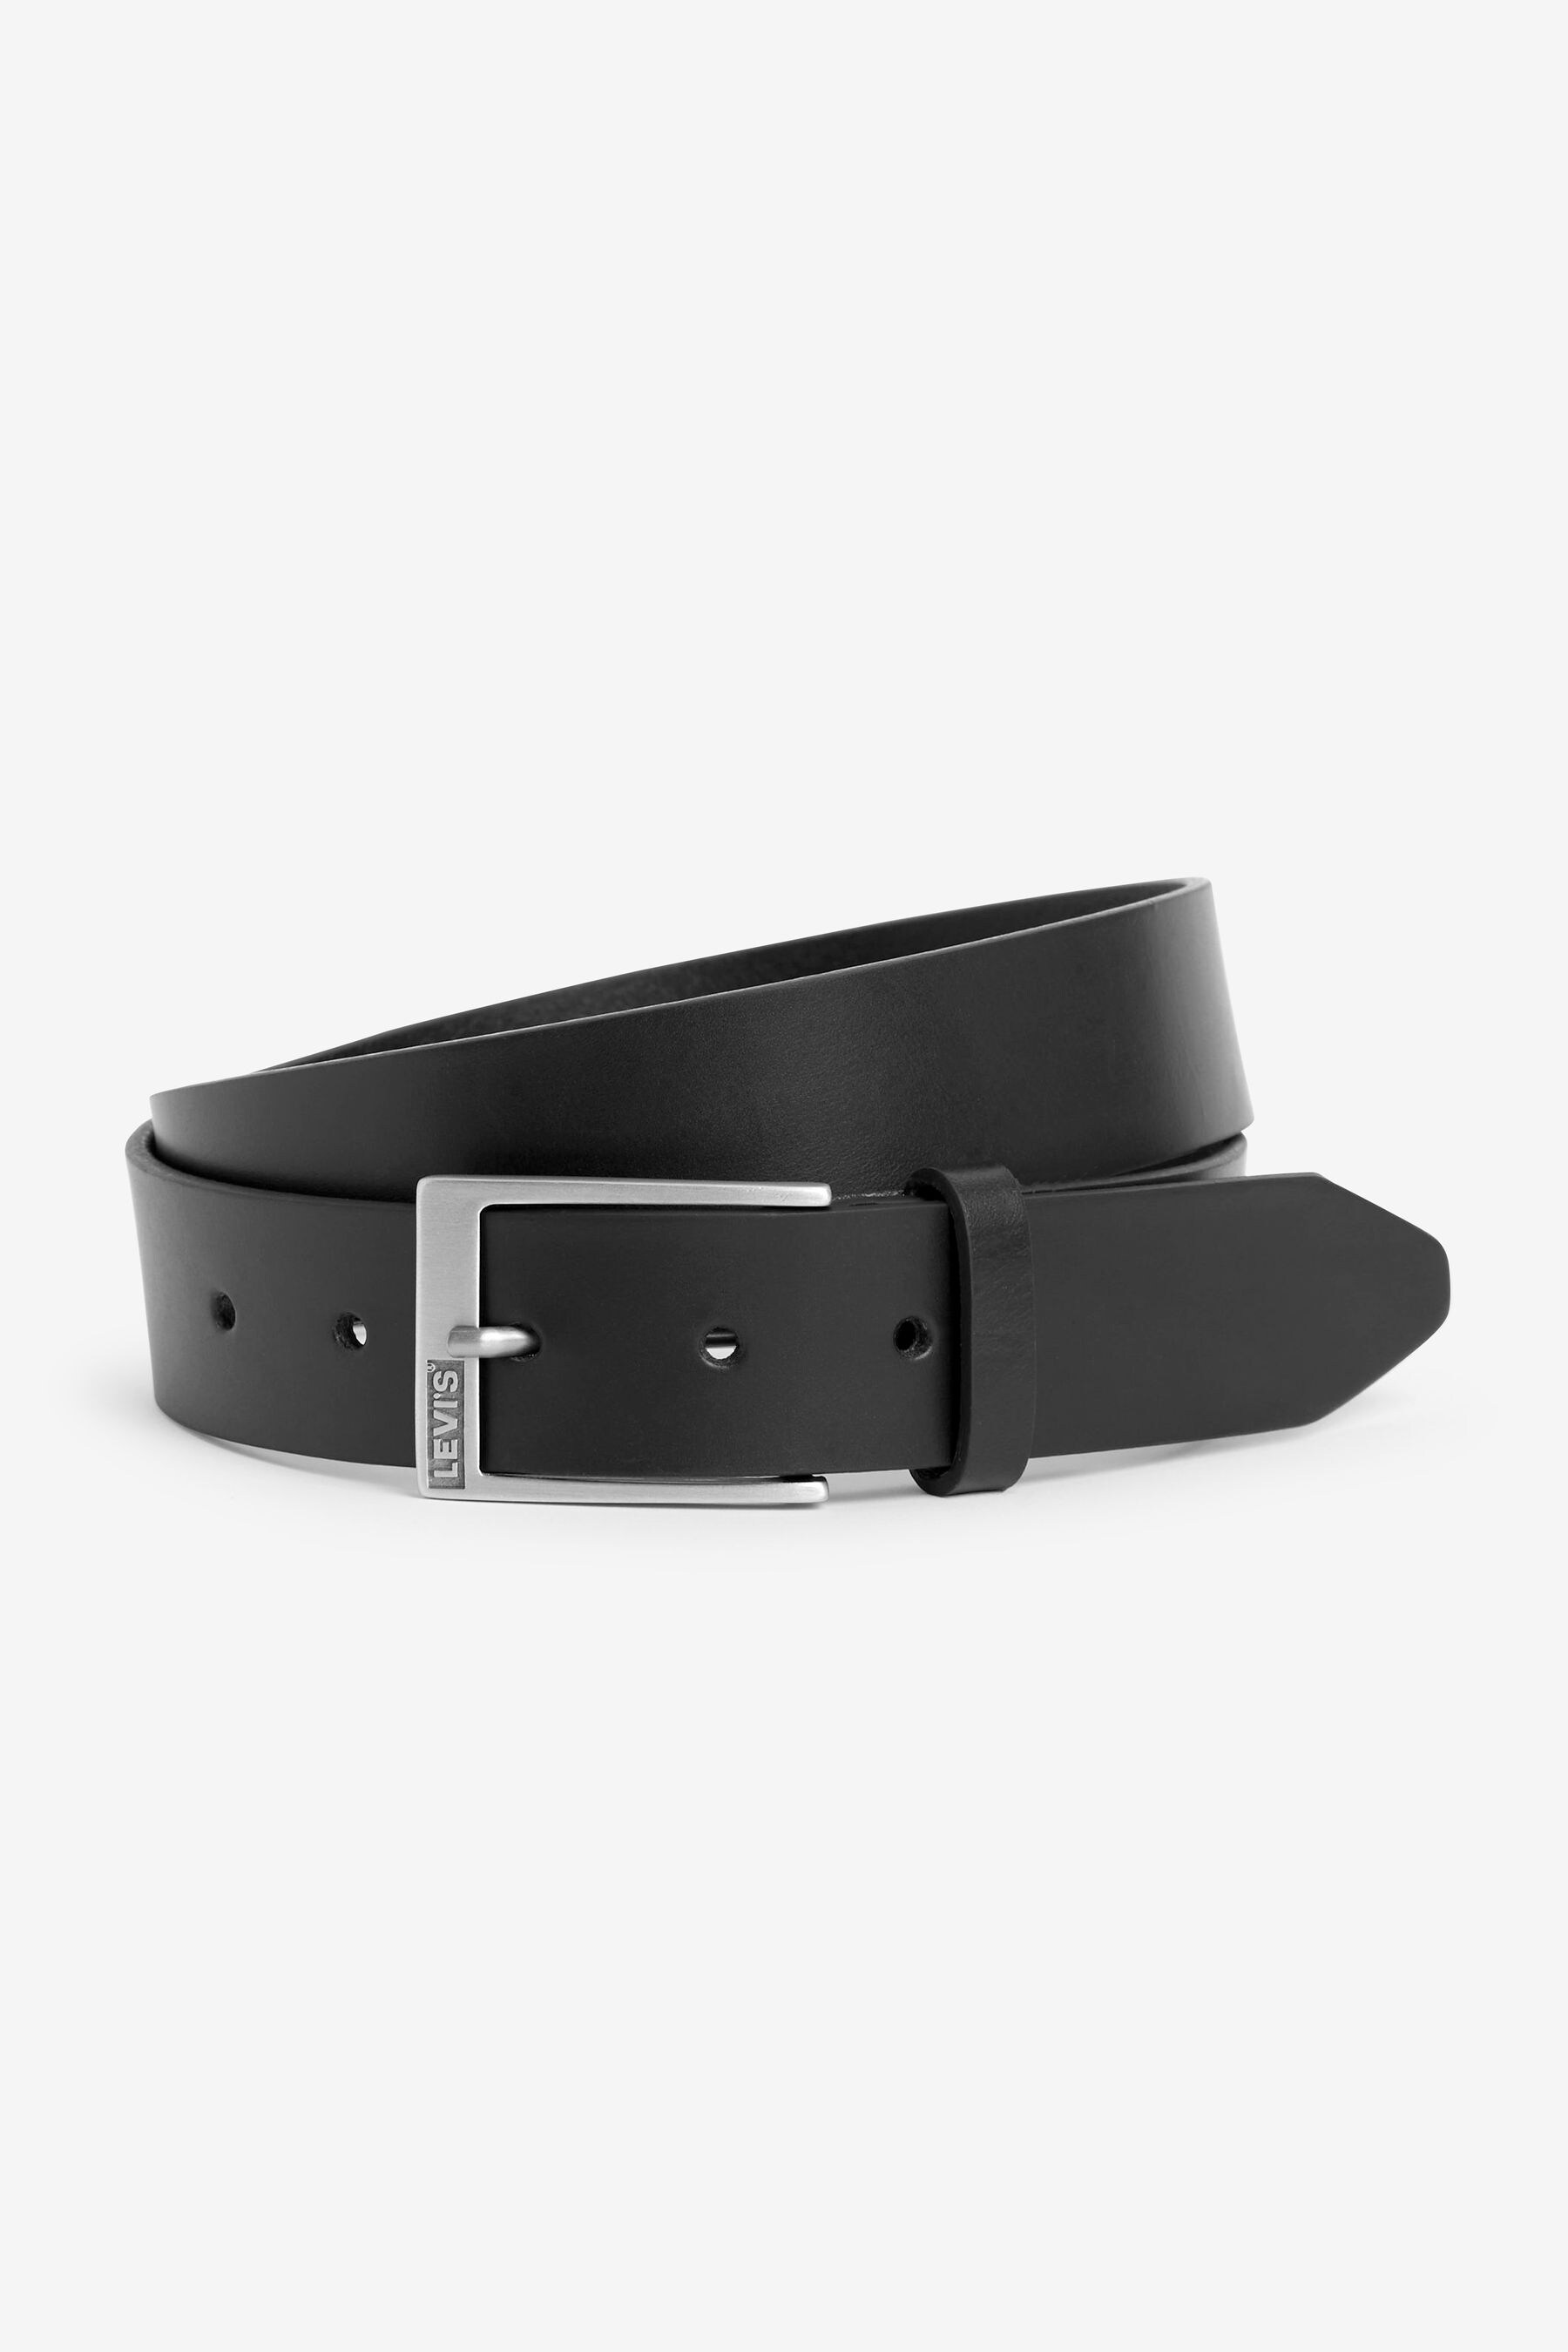 Buy Levi's® Black Box Tab Leather Belt from the Next UK online shop